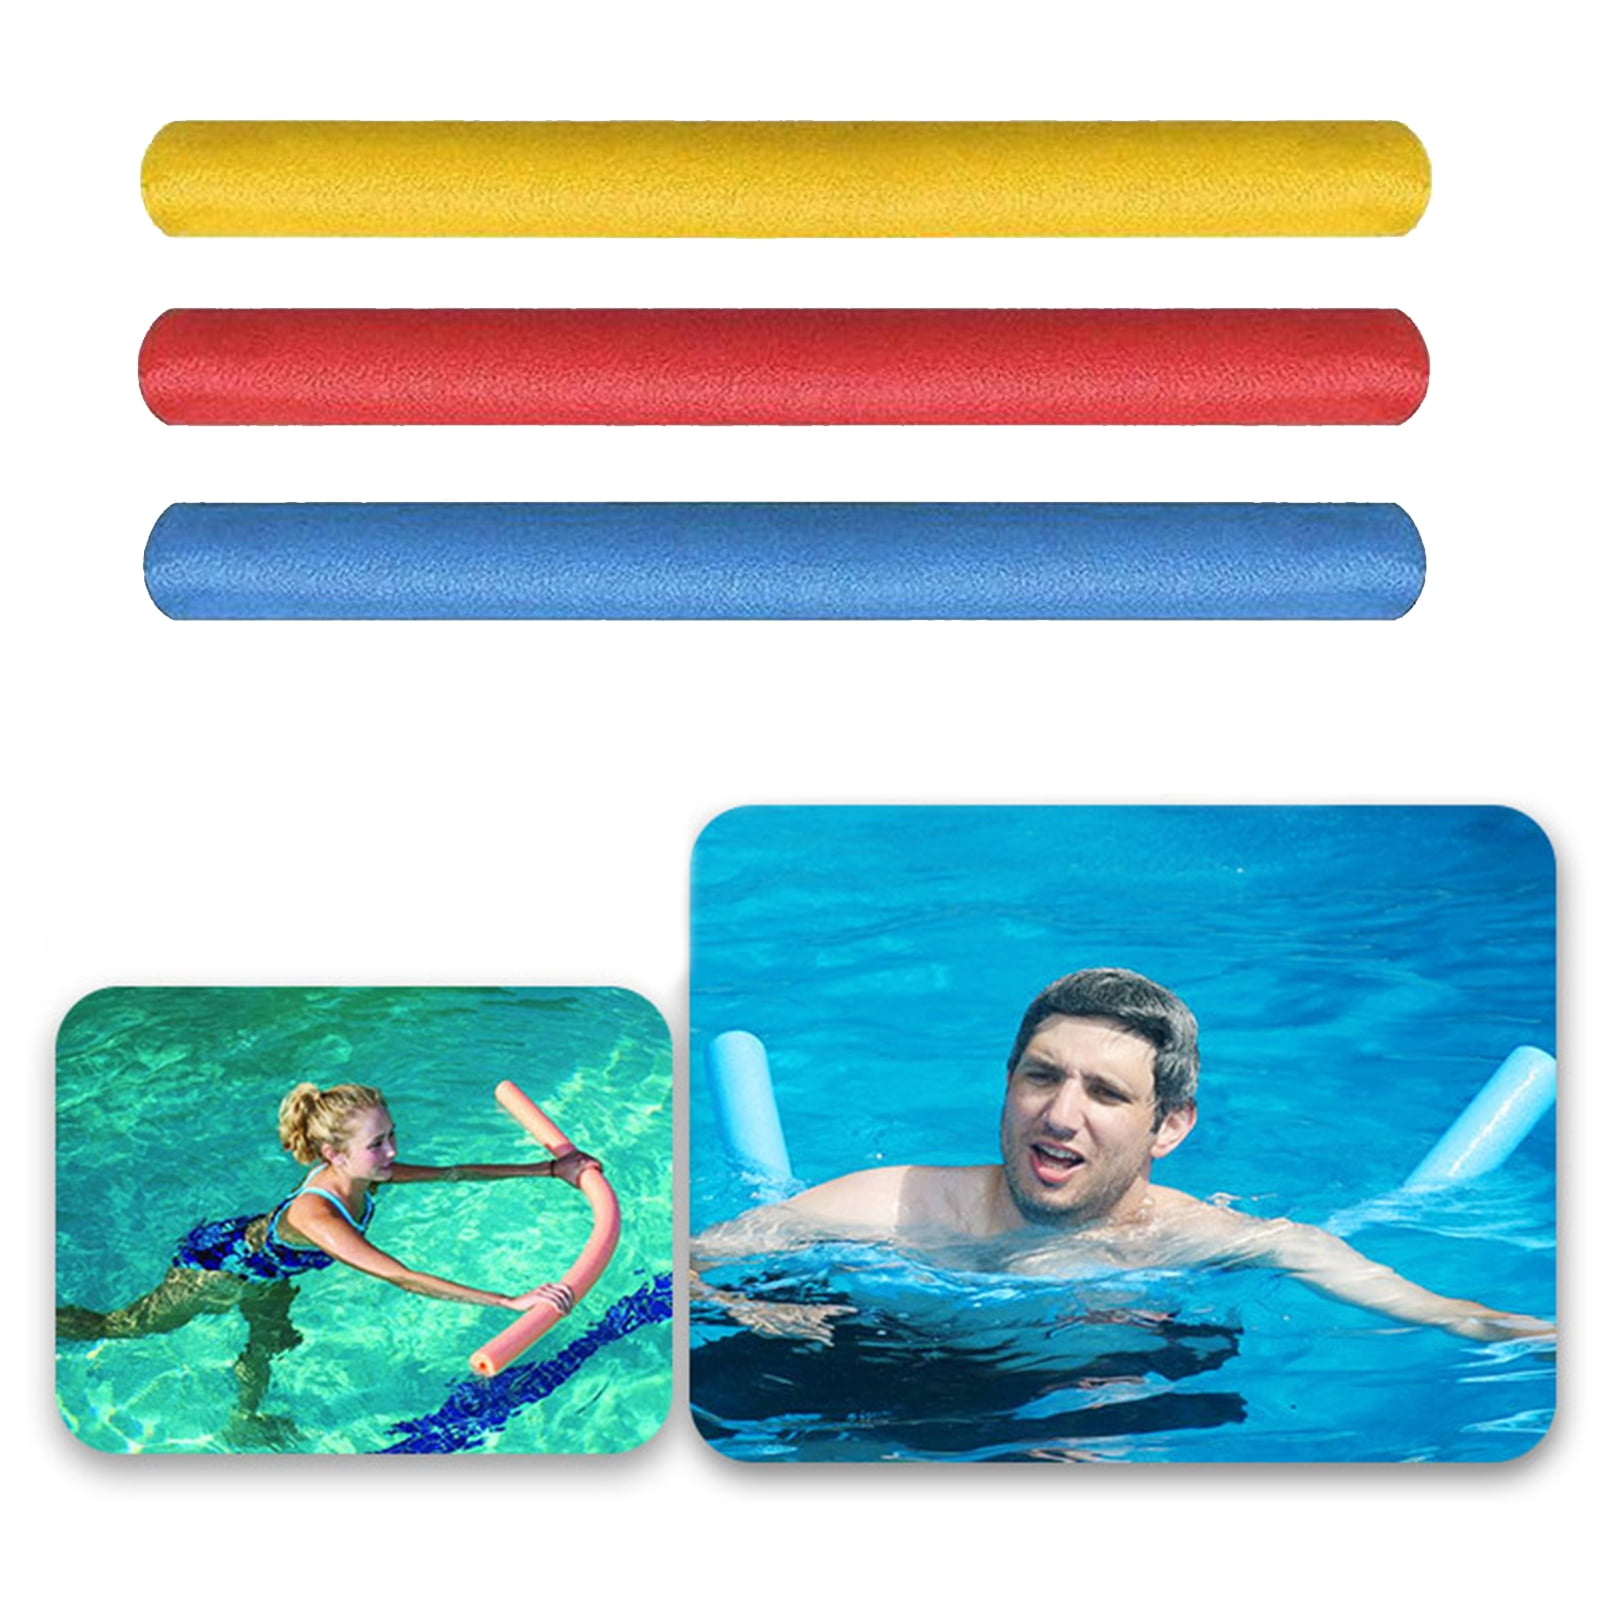 Large Thick Foam Pool Noodle Swimming Pool Super Soft Floating Noodles BRAND NEW 